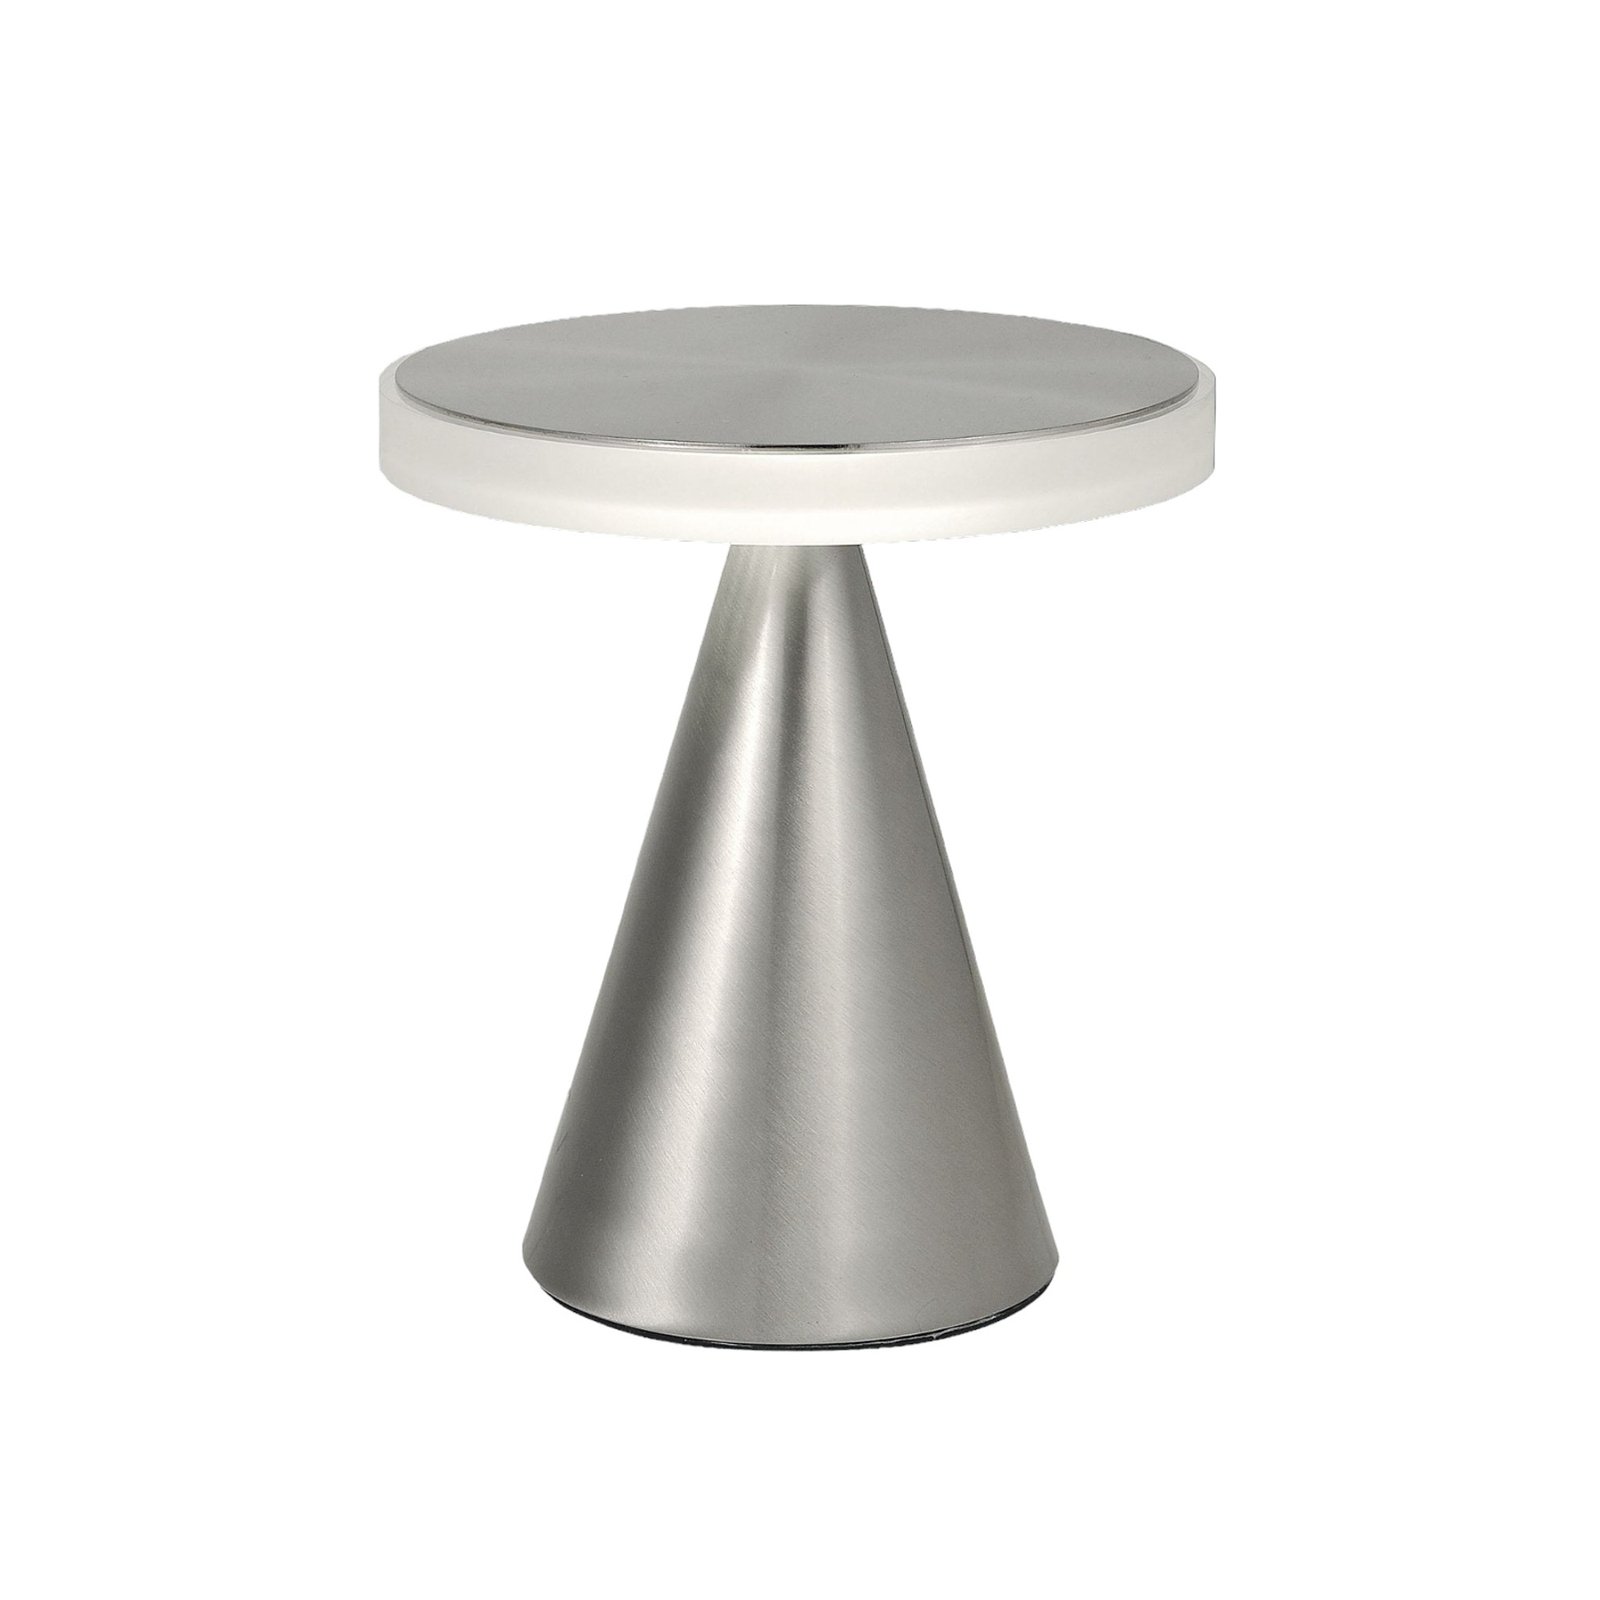 LED table lamp Neutra, height 27 cm, nickel, touch dimmer